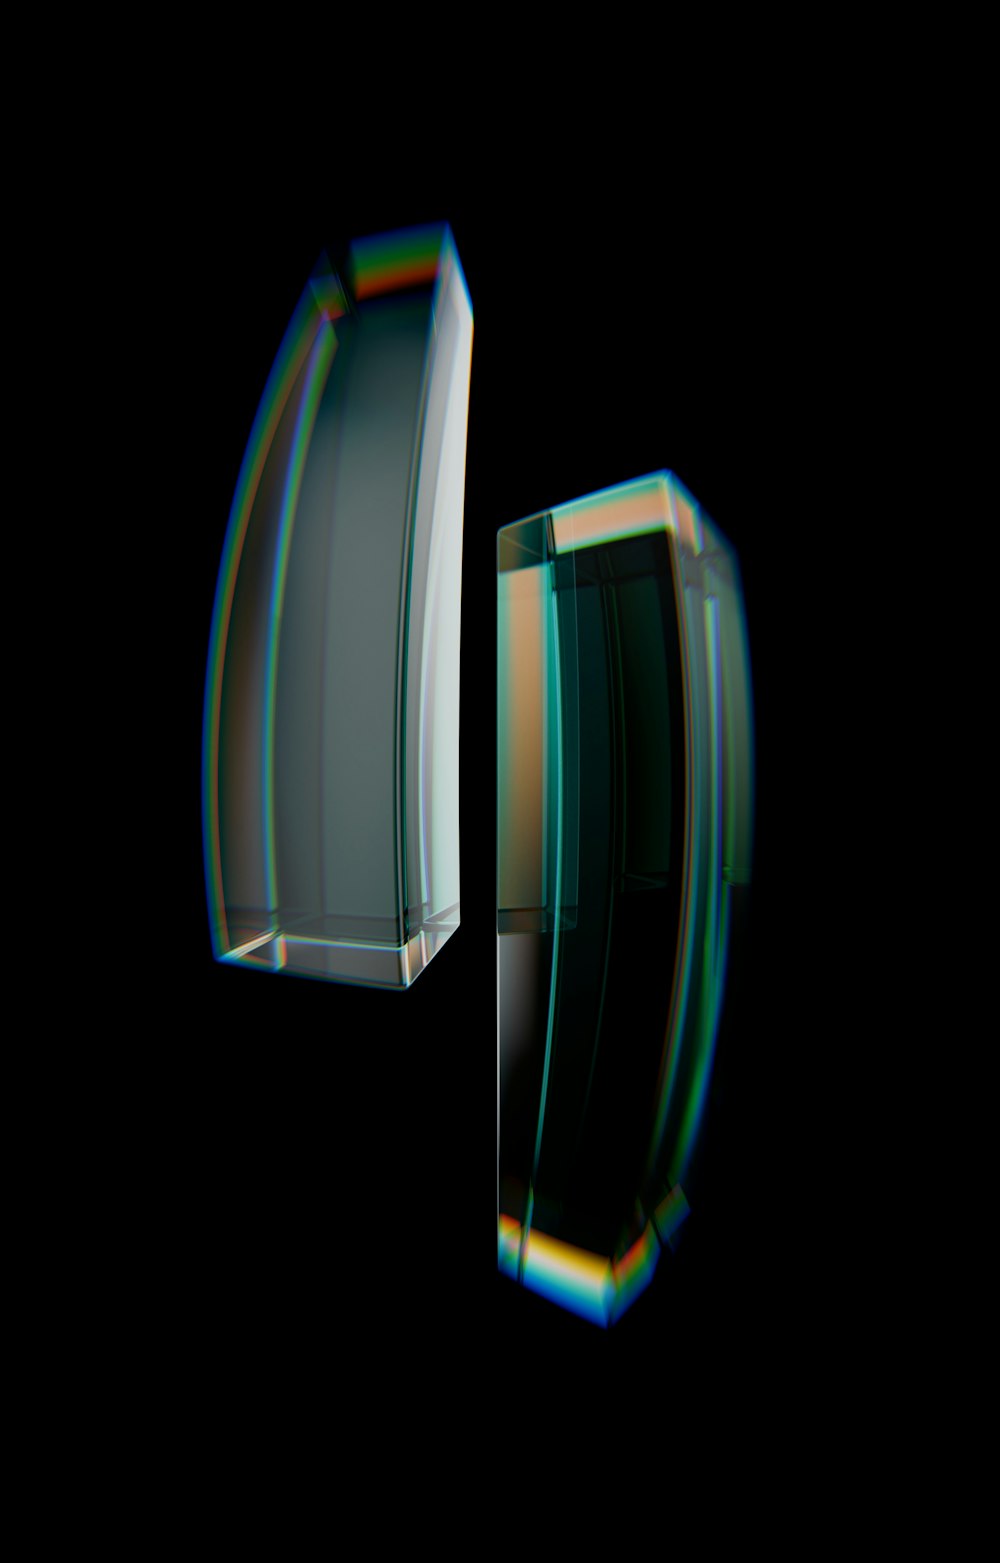 a glass object with a black background